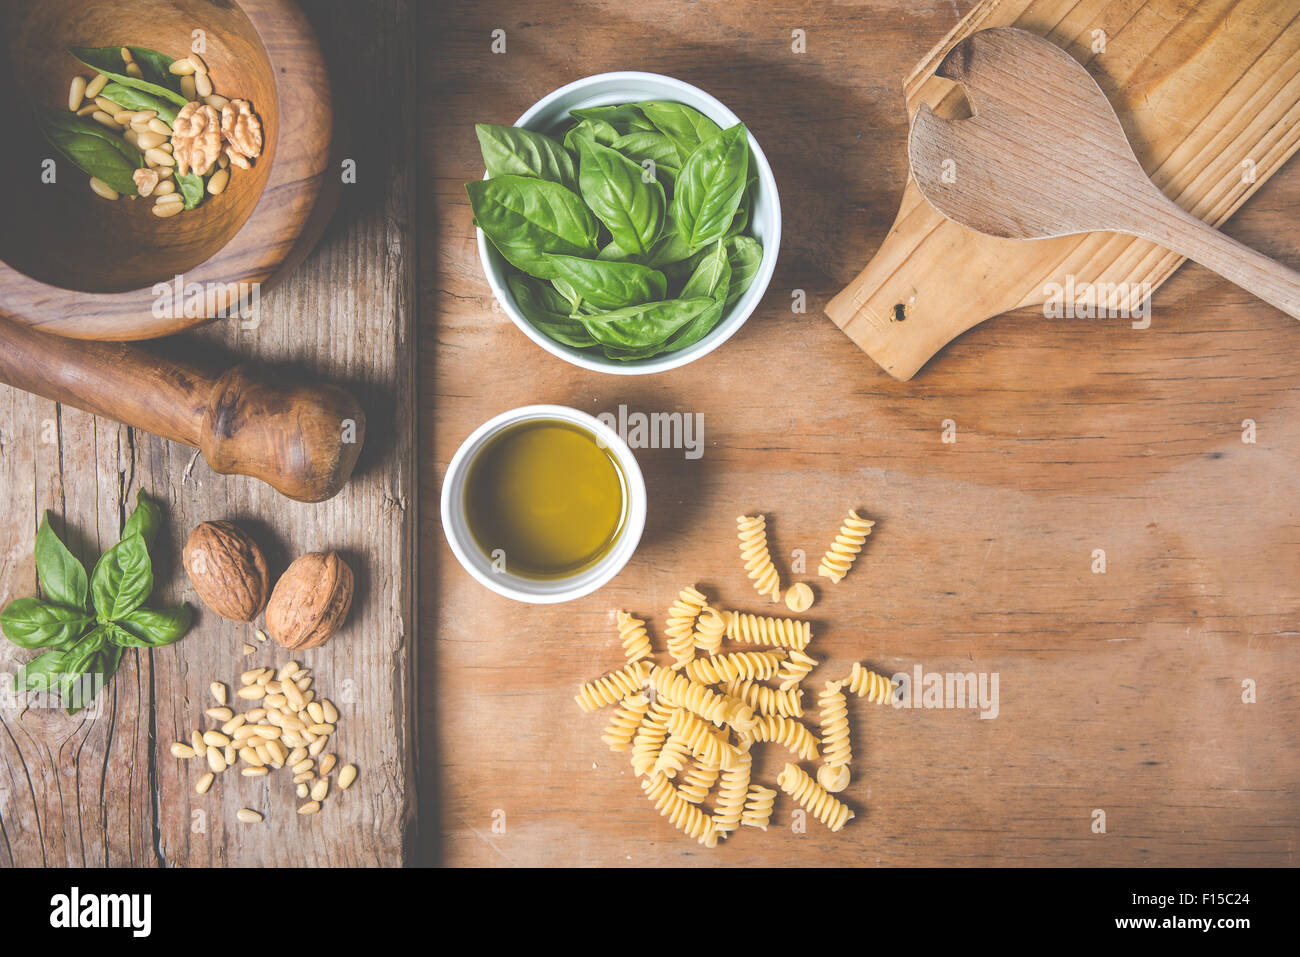 Making pasta with pesto with the original recipe of Genova. Wooden background and accessories communicate the sense of Italy. Stock Photo